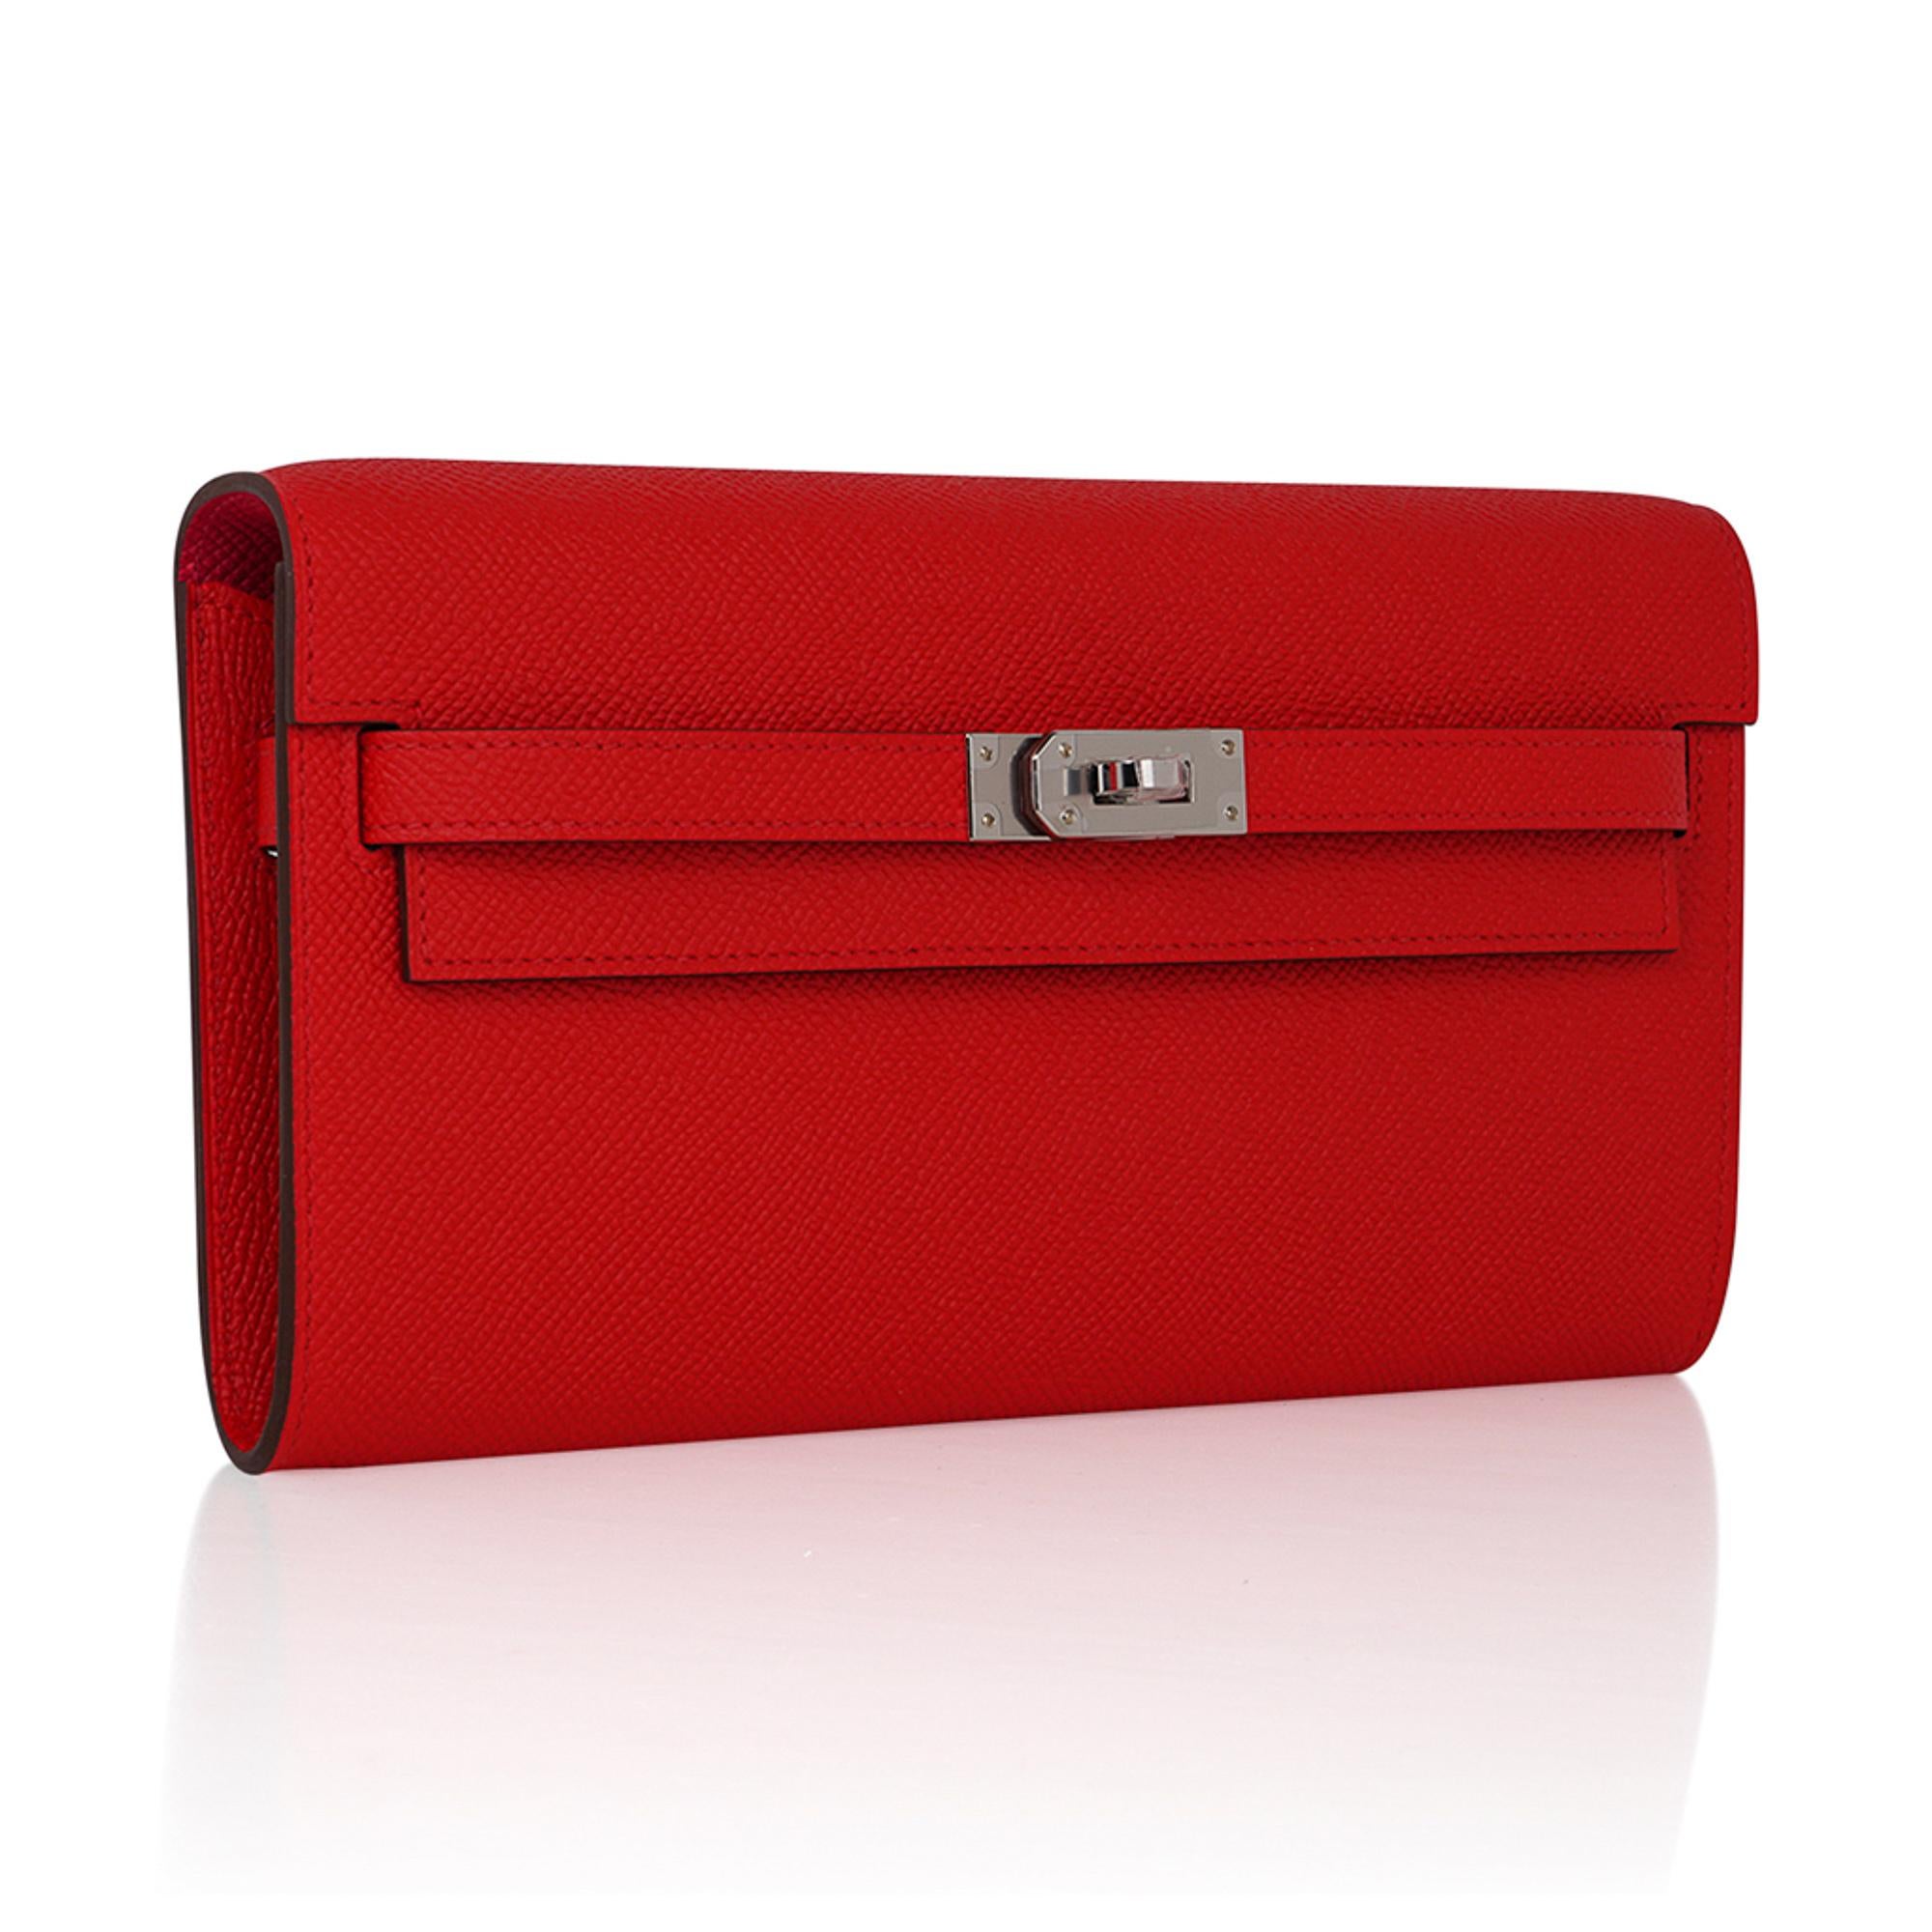 Mightychic offers an Hermes Kelly Classique To Go Verso wallet featured in Rouge de Coeur with Rose Extreme interior.
This beautiful Hermes red is accentuated in Epsom leather.
Often carried as a clutch, this Kelly wallet beauty is a jewel in your